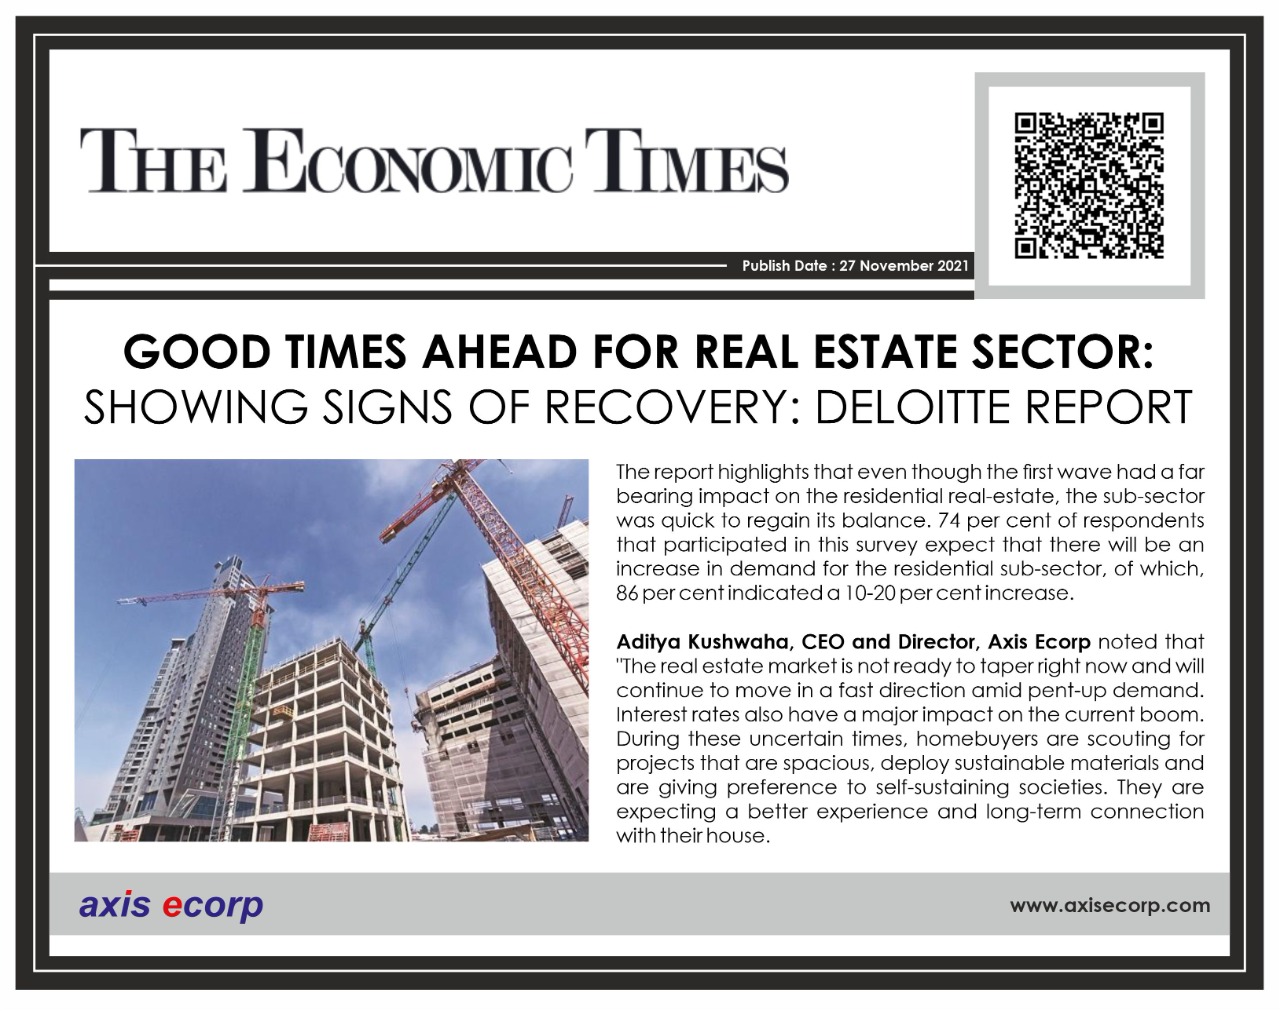 Good times ahead for real estate sector 